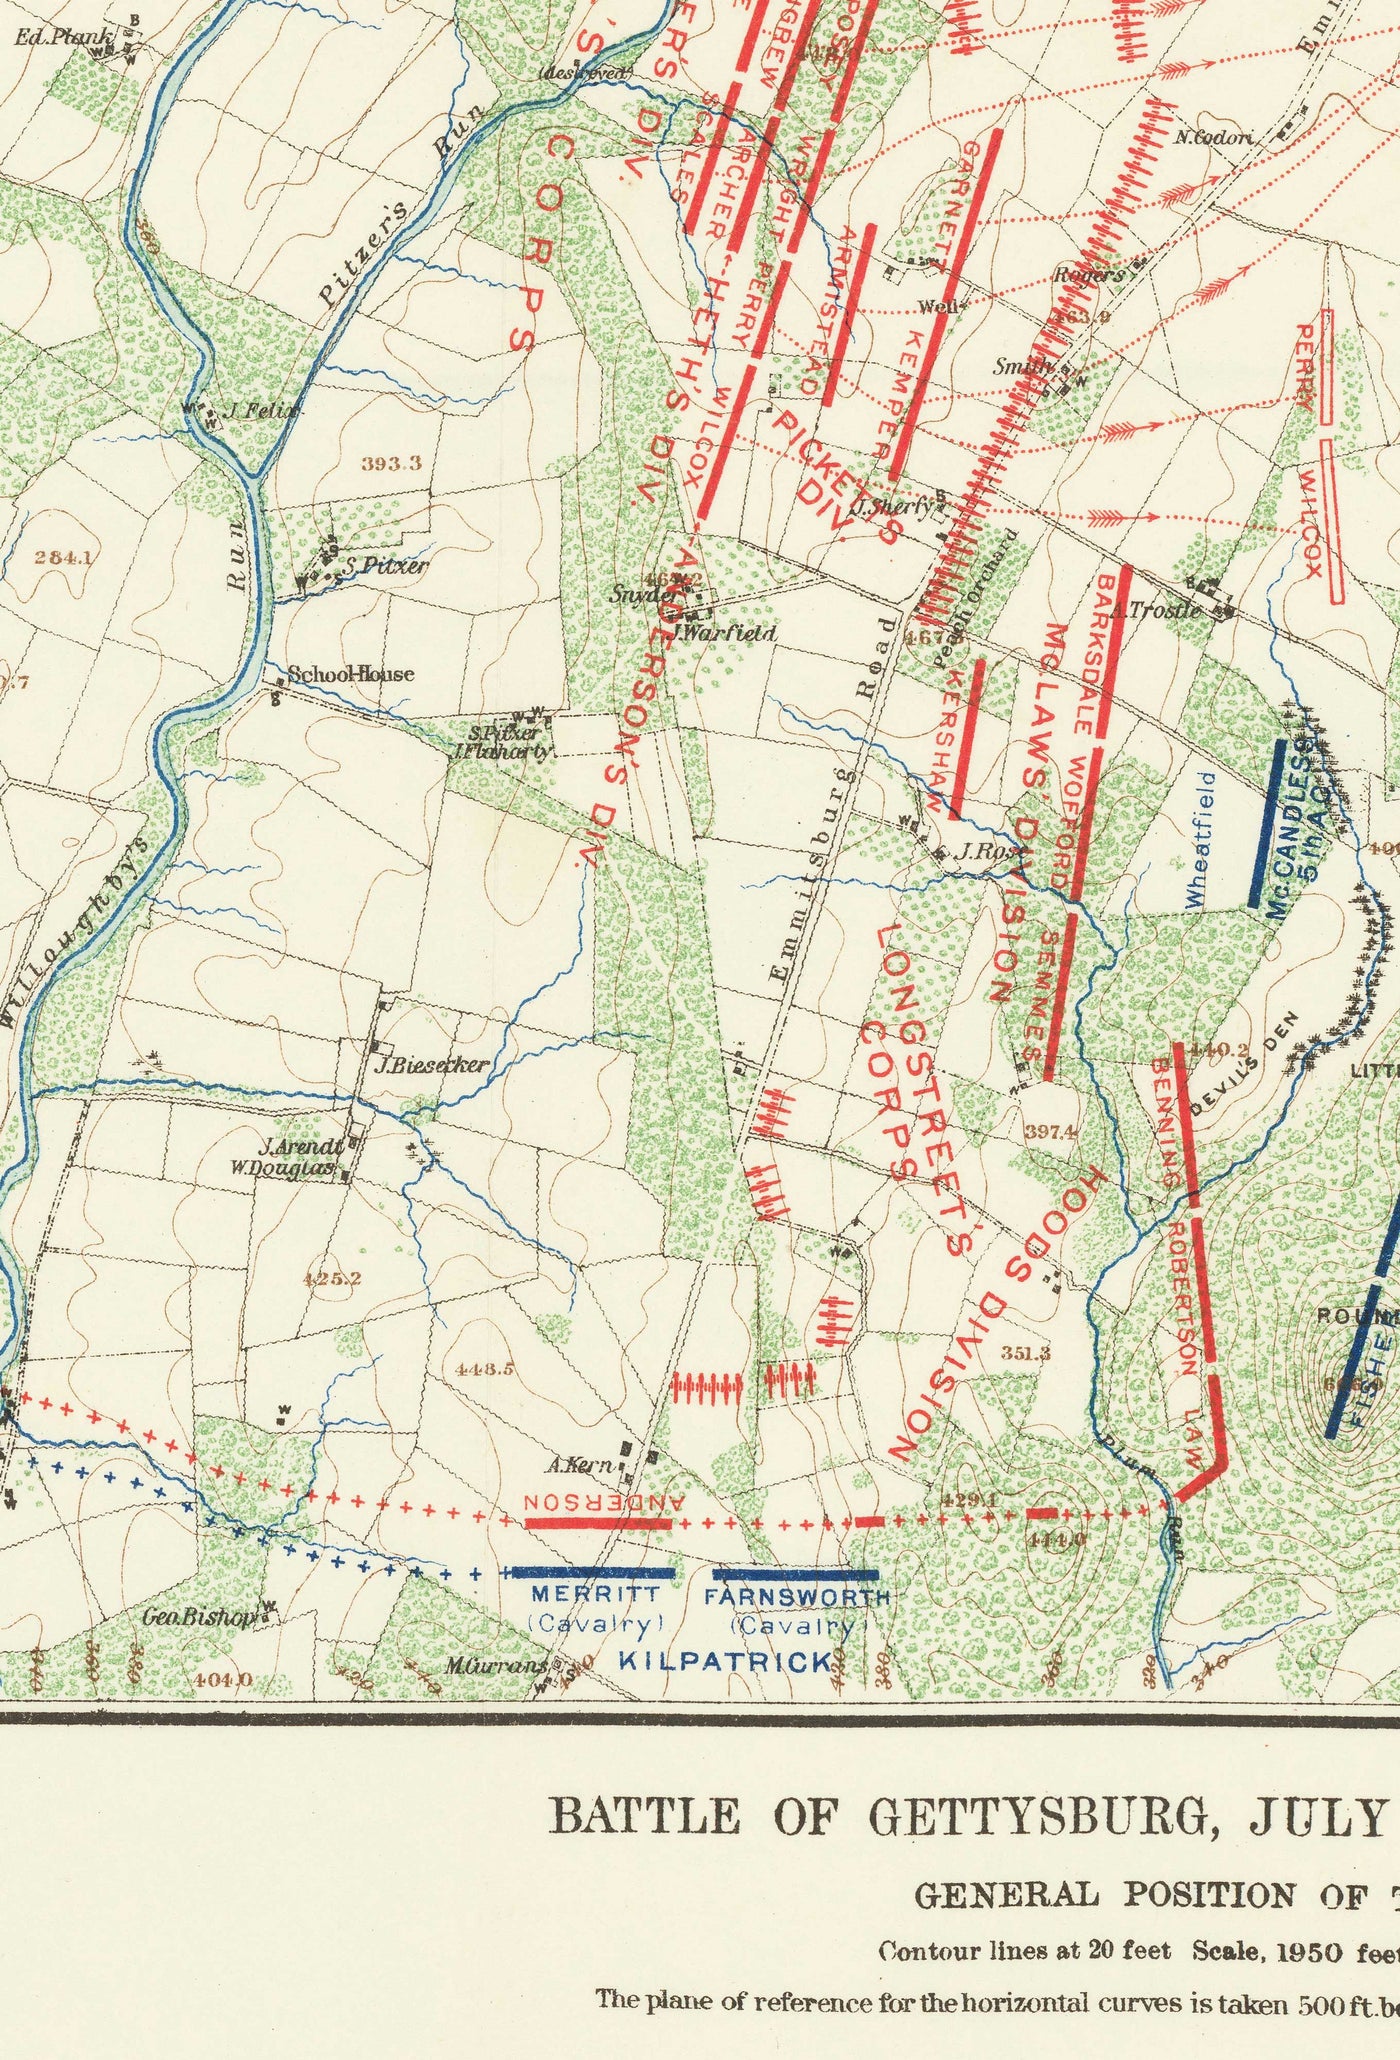 Old Map of the Battle of Gettysburg in 1900 by Julius Bien - North vs. South, Confederacy vs. Union Civil War Chart